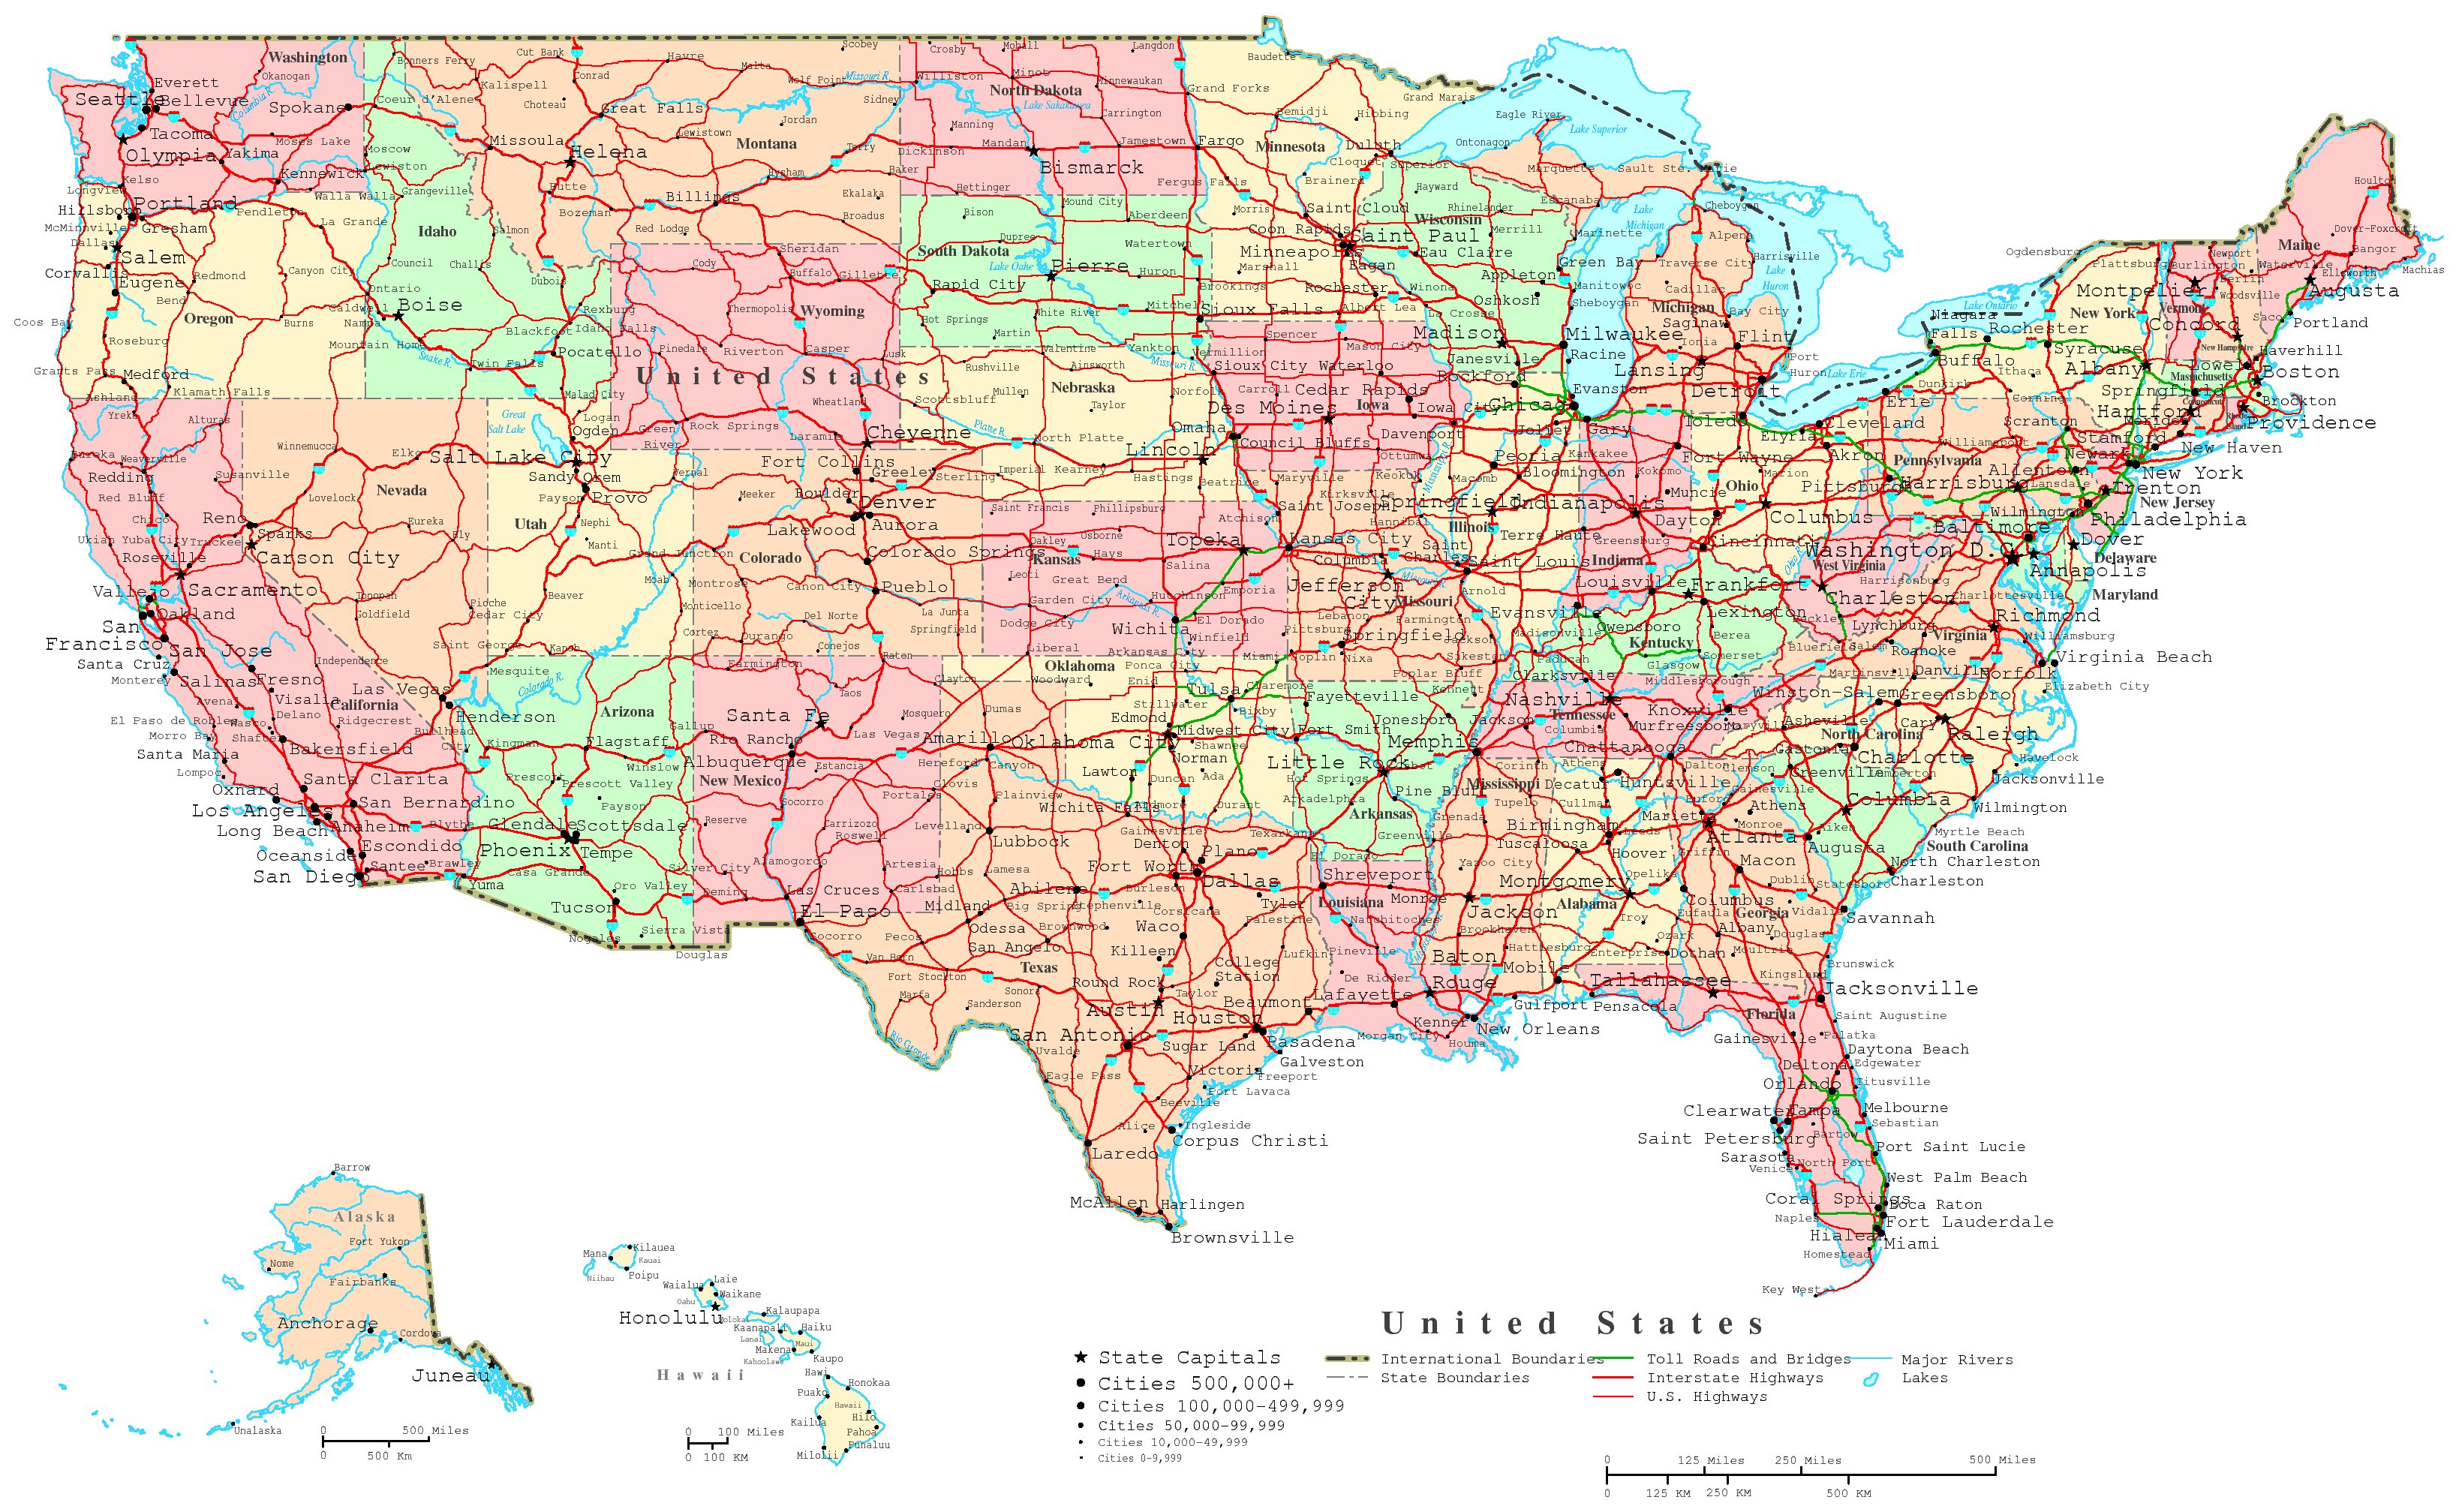 Free Printable Map Of The United States With Major Cities - Printable ...